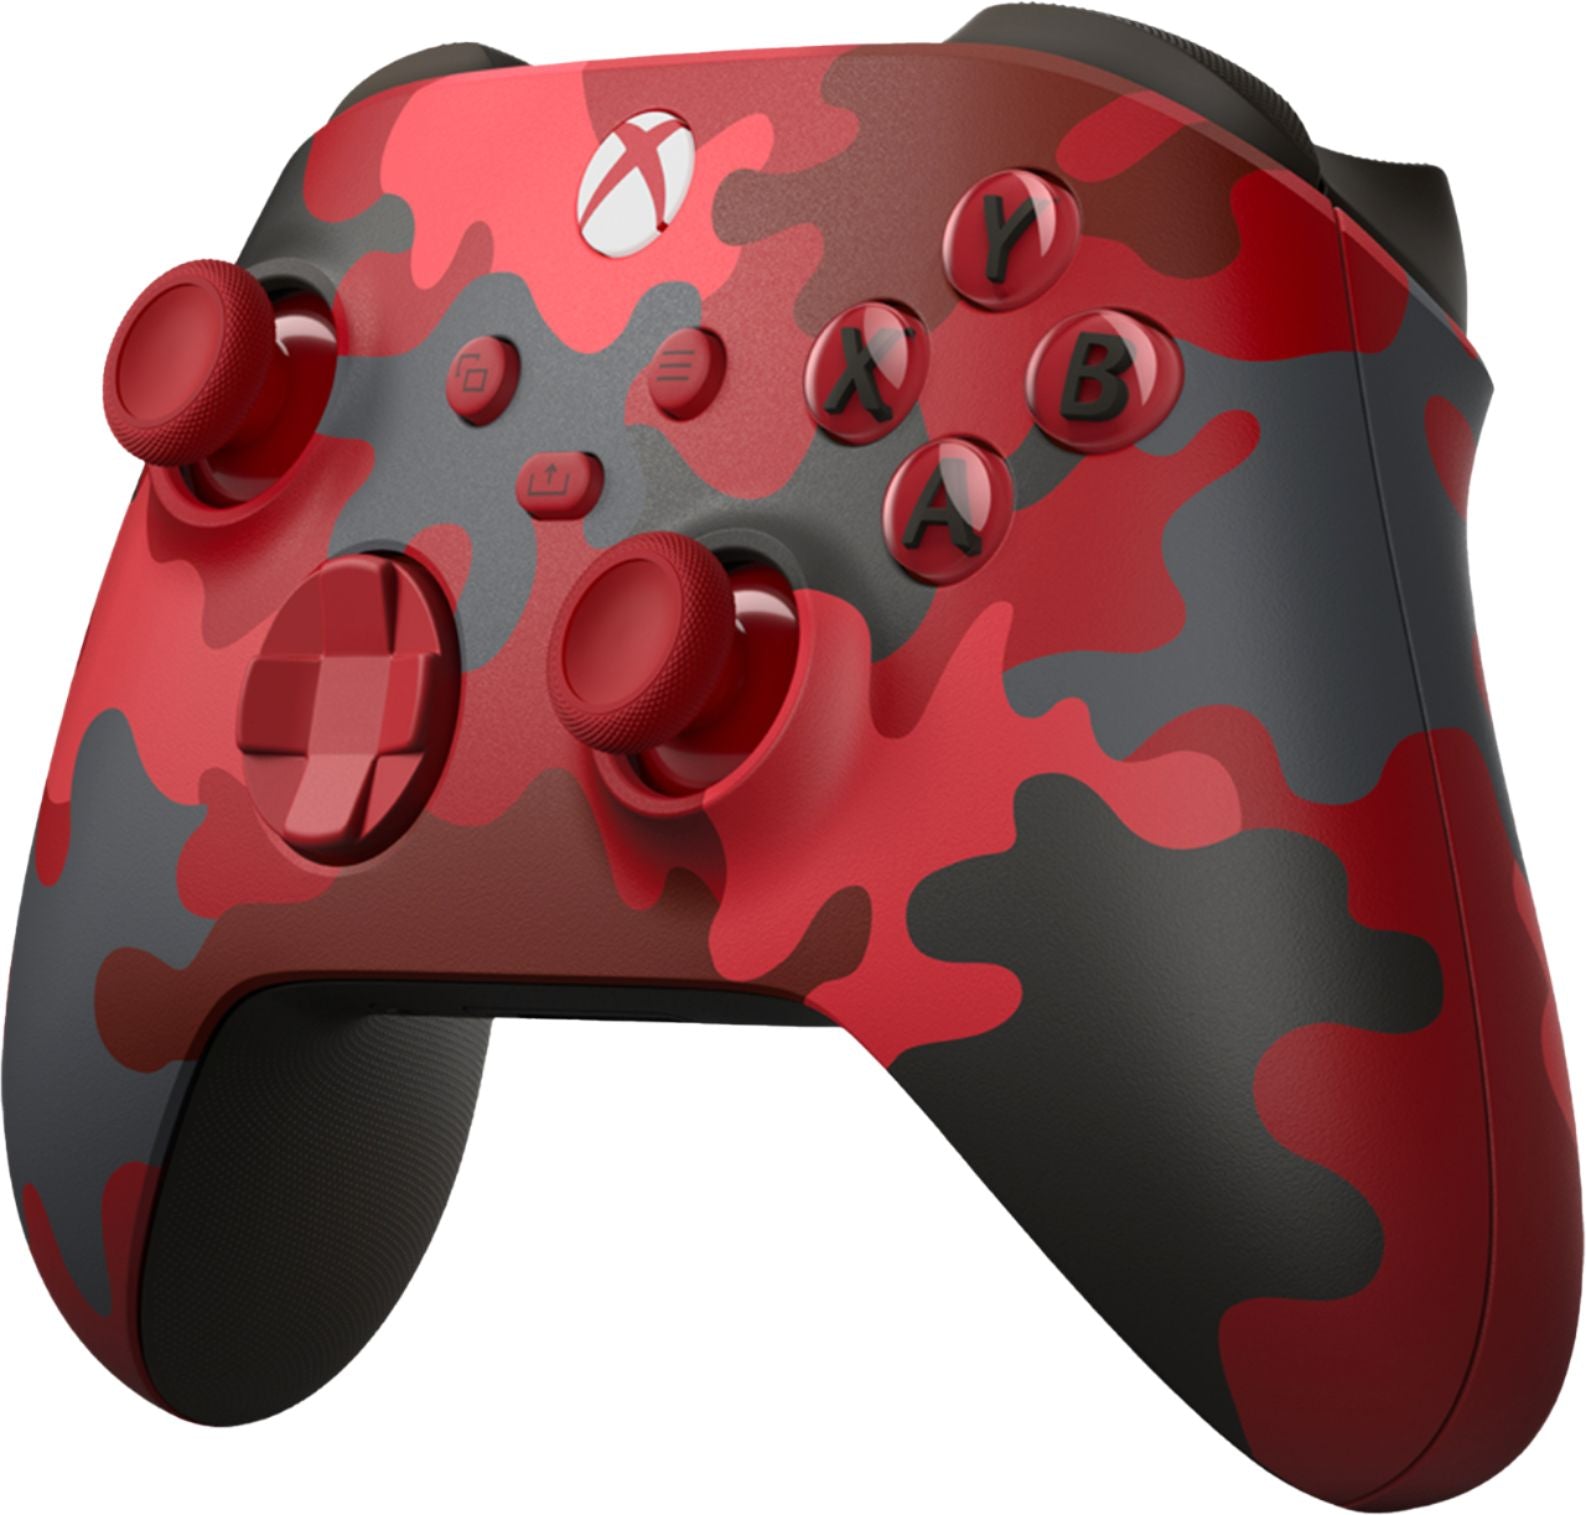 Microsoft - QAU-00016 Controller for Xbox Series X, Xbox Series S, and Xbox One (Latest Model) - Daystrike Camo Special Edition